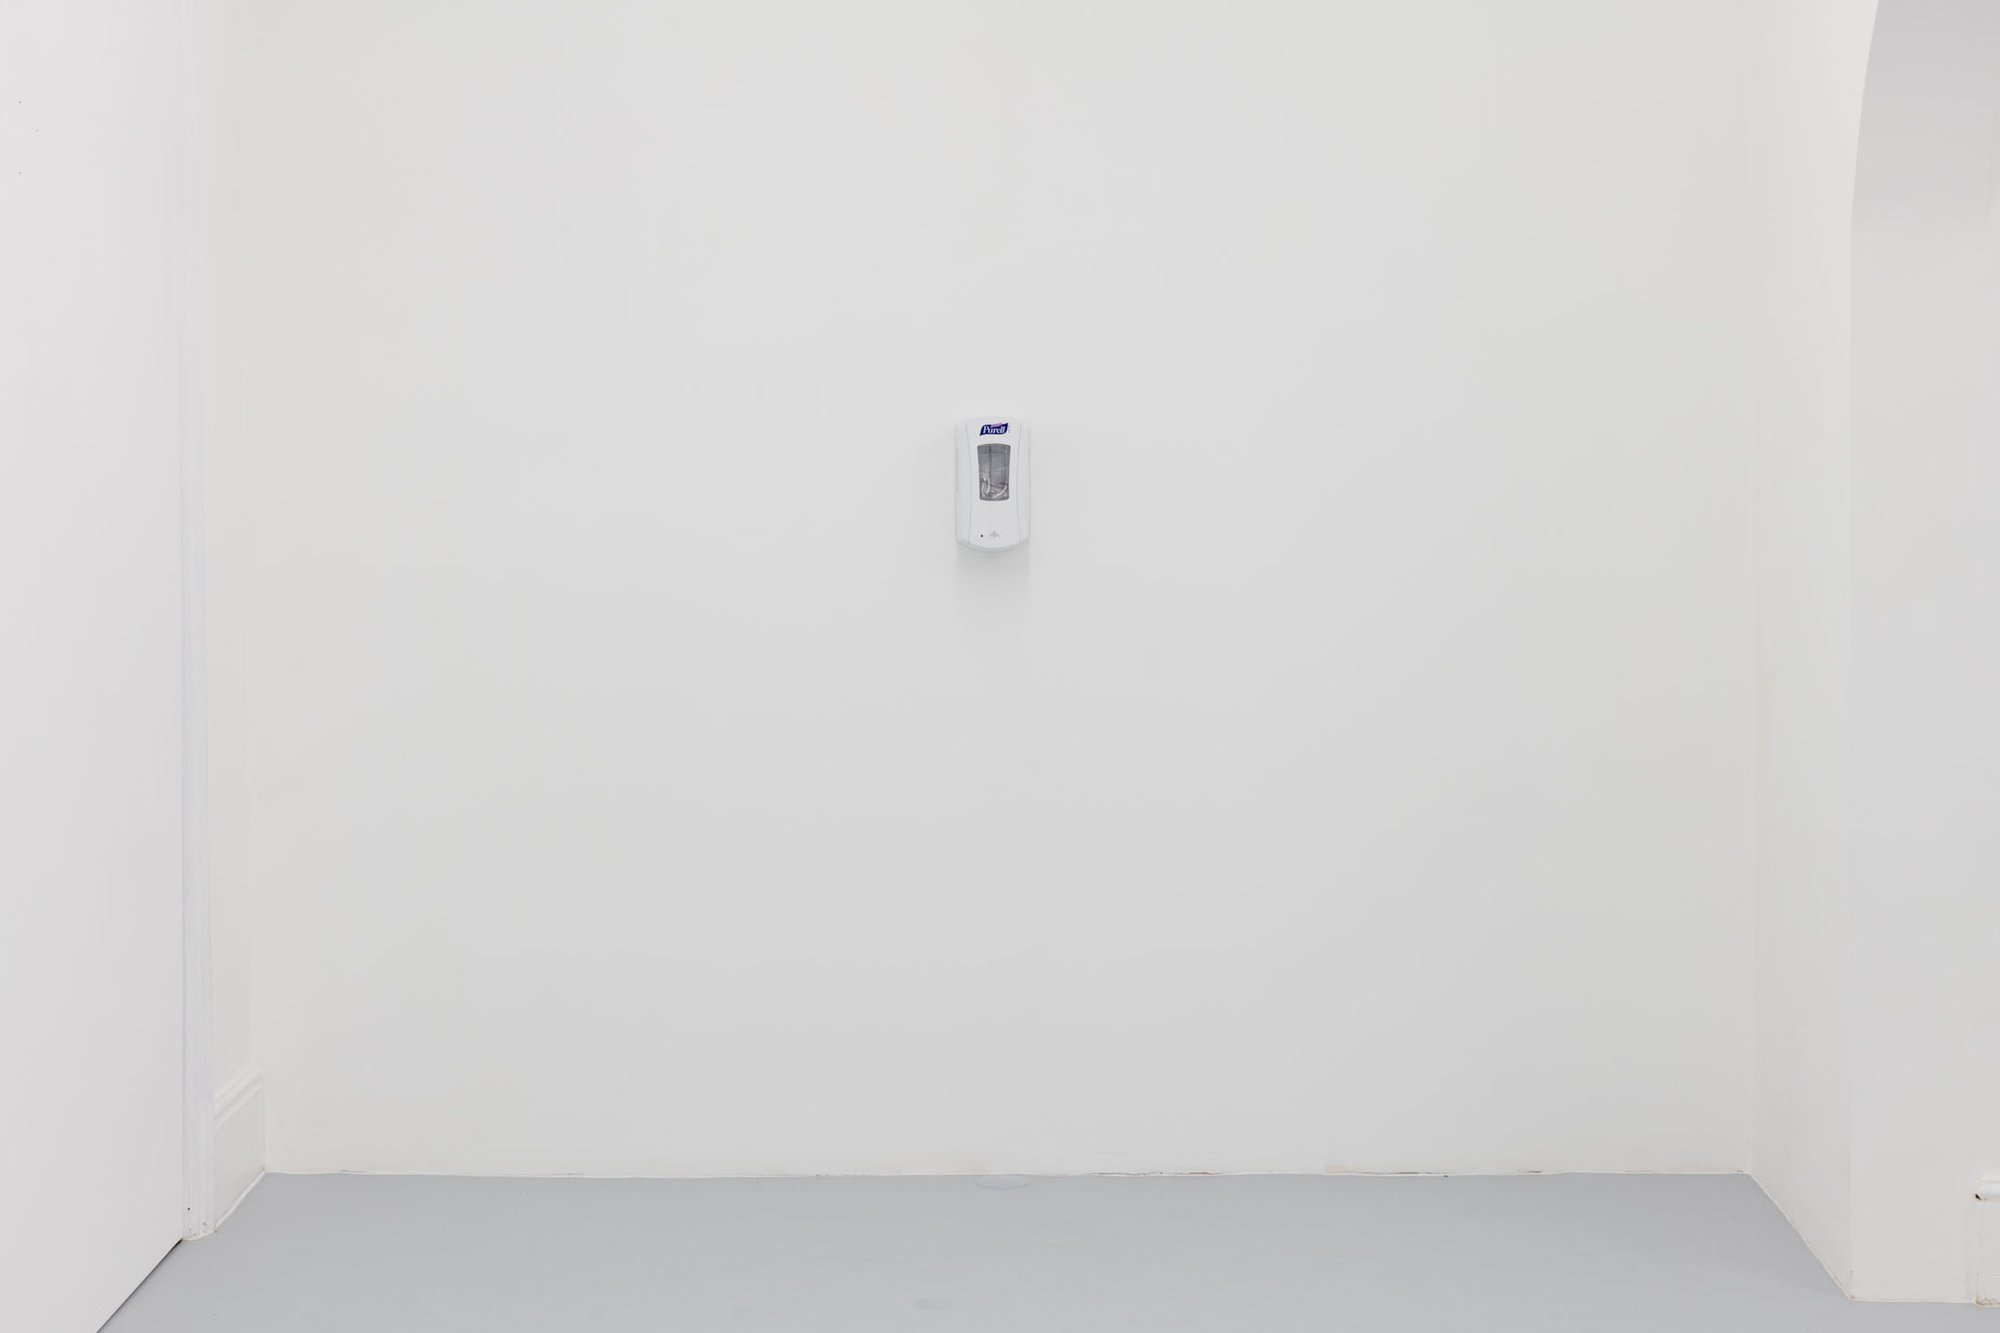 Ian Law, Untitled, Purell LTX-12 Dispenser with adapted circuitry, hygienic hand rub, 2015